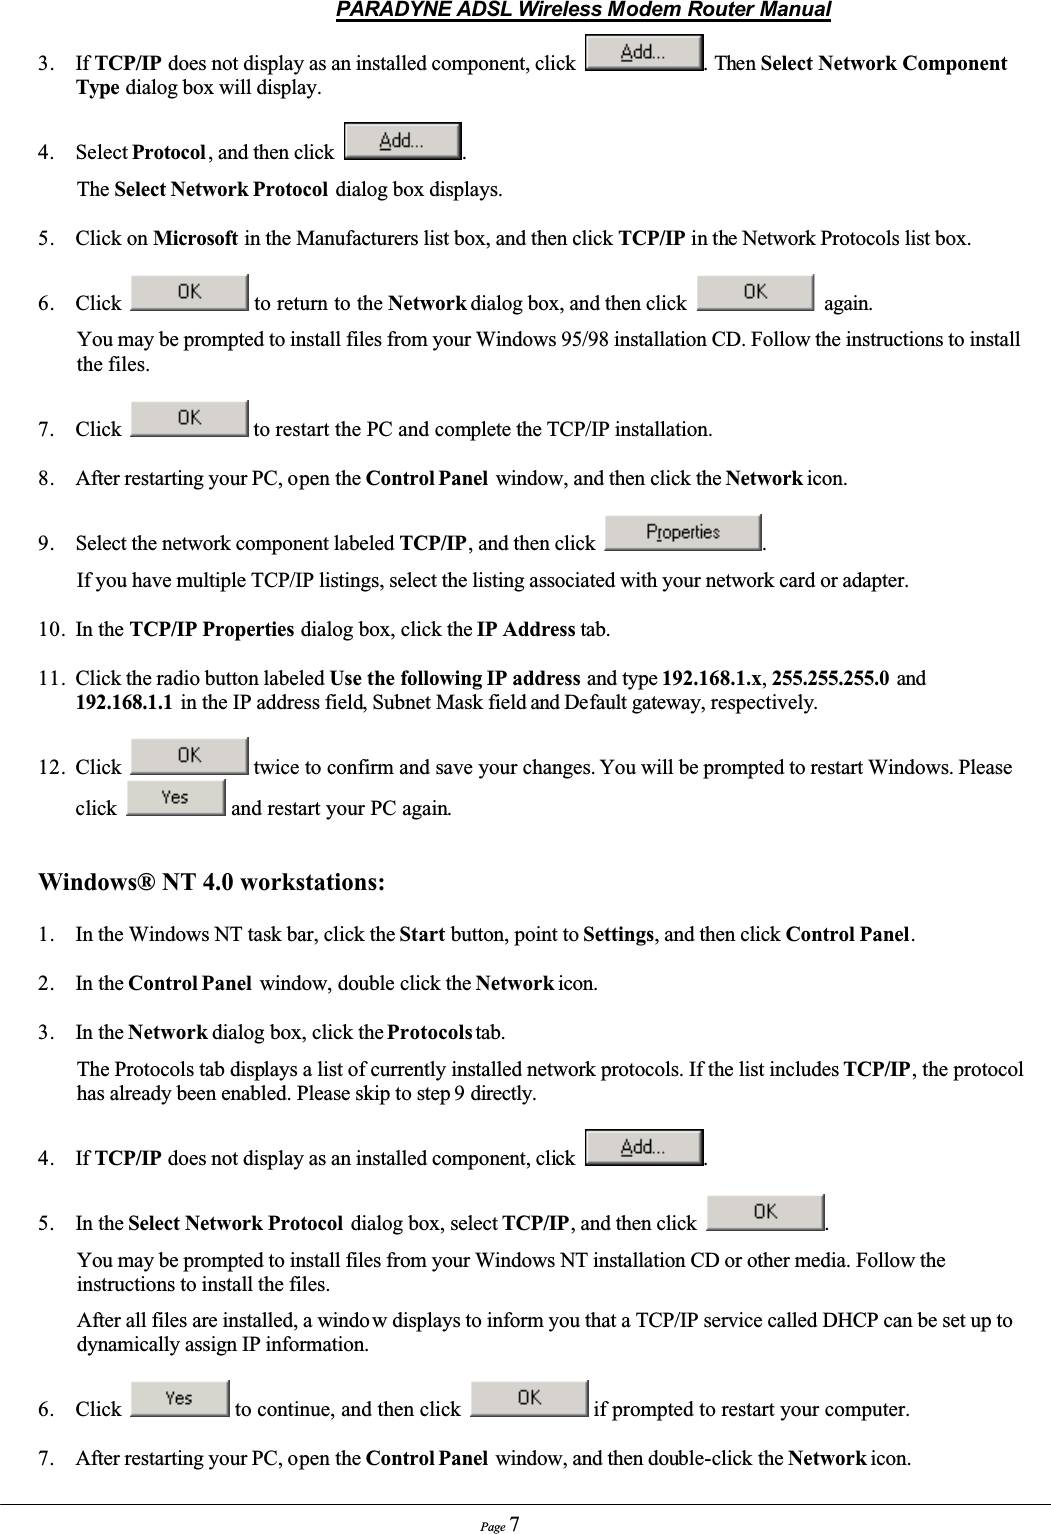 PARADYNE ADSL Wireless Modem Router ManualPage 73. If TCP/IP does not display as an installed component, click  .ThenSelect Network Component Type dialog box will display.4. Select Protocol , and then click  .The Select Network Protocol  dialog box displays.5. Click on Microsoft in the Manufacturers list box, and then click TCP/IP in the Network Protocols list box.6. Click  to return to the Network dialog box, and then click   again.You may be prompted to install files from your Windows 95/98 installation CD. Follow the instructions to install the files.7. Click  to restart the PC and complete the TCP/IP installation.8. After restarting your PC, open the Control Panel  window, and then click the Network icon.9. Select the network component labeled TCP/IP, and then click  .If you have multiple TCP/IP listings, select the listing associated with your network card or adapter.10. In the TCP/IP Properties dialog box, click the IP Address tab.11. Click the radio button labeled Use the following IP address and type 192.168.1.x,255.255.255.0 and192.168.1.1 in the IP address field, Subnet Mask field and Default gateway, respectively.12. Click  twice to confirm and save your changes. You will be prompted to restart Windows. Please click  and restart your PC again.Windows® NT 4.0 workstations:1. In the Windows NT task bar, click the Start button, point to Settings, and then click Control Panel.2. In the Control Panel  window, double click the Network icon.3. In the Network dialog box, click the Protocols tab.The Protocols tab displays a list of currently installed network protocols. If the list includes TCP/IP, the protocol has already been enabled. Please skip to step 9 directly.4. If TCP/IP does not display as an installed component, click .5. In the Select Network Protocol  dialog box, select TCP/IP, and then click  .You may be prompted to install files from your Windows NT installation CD or other media. Follow the instructions to install the files.After all files are installed, a windo w displays to inform you that a TCP/IP service called DHCP can be set up to dynamically assign IP information.6. Click  to continue, and then click   if prompted to restart your computer.7. After restarting your PC, open the Control Panel  window, and then double-click the Network icon.